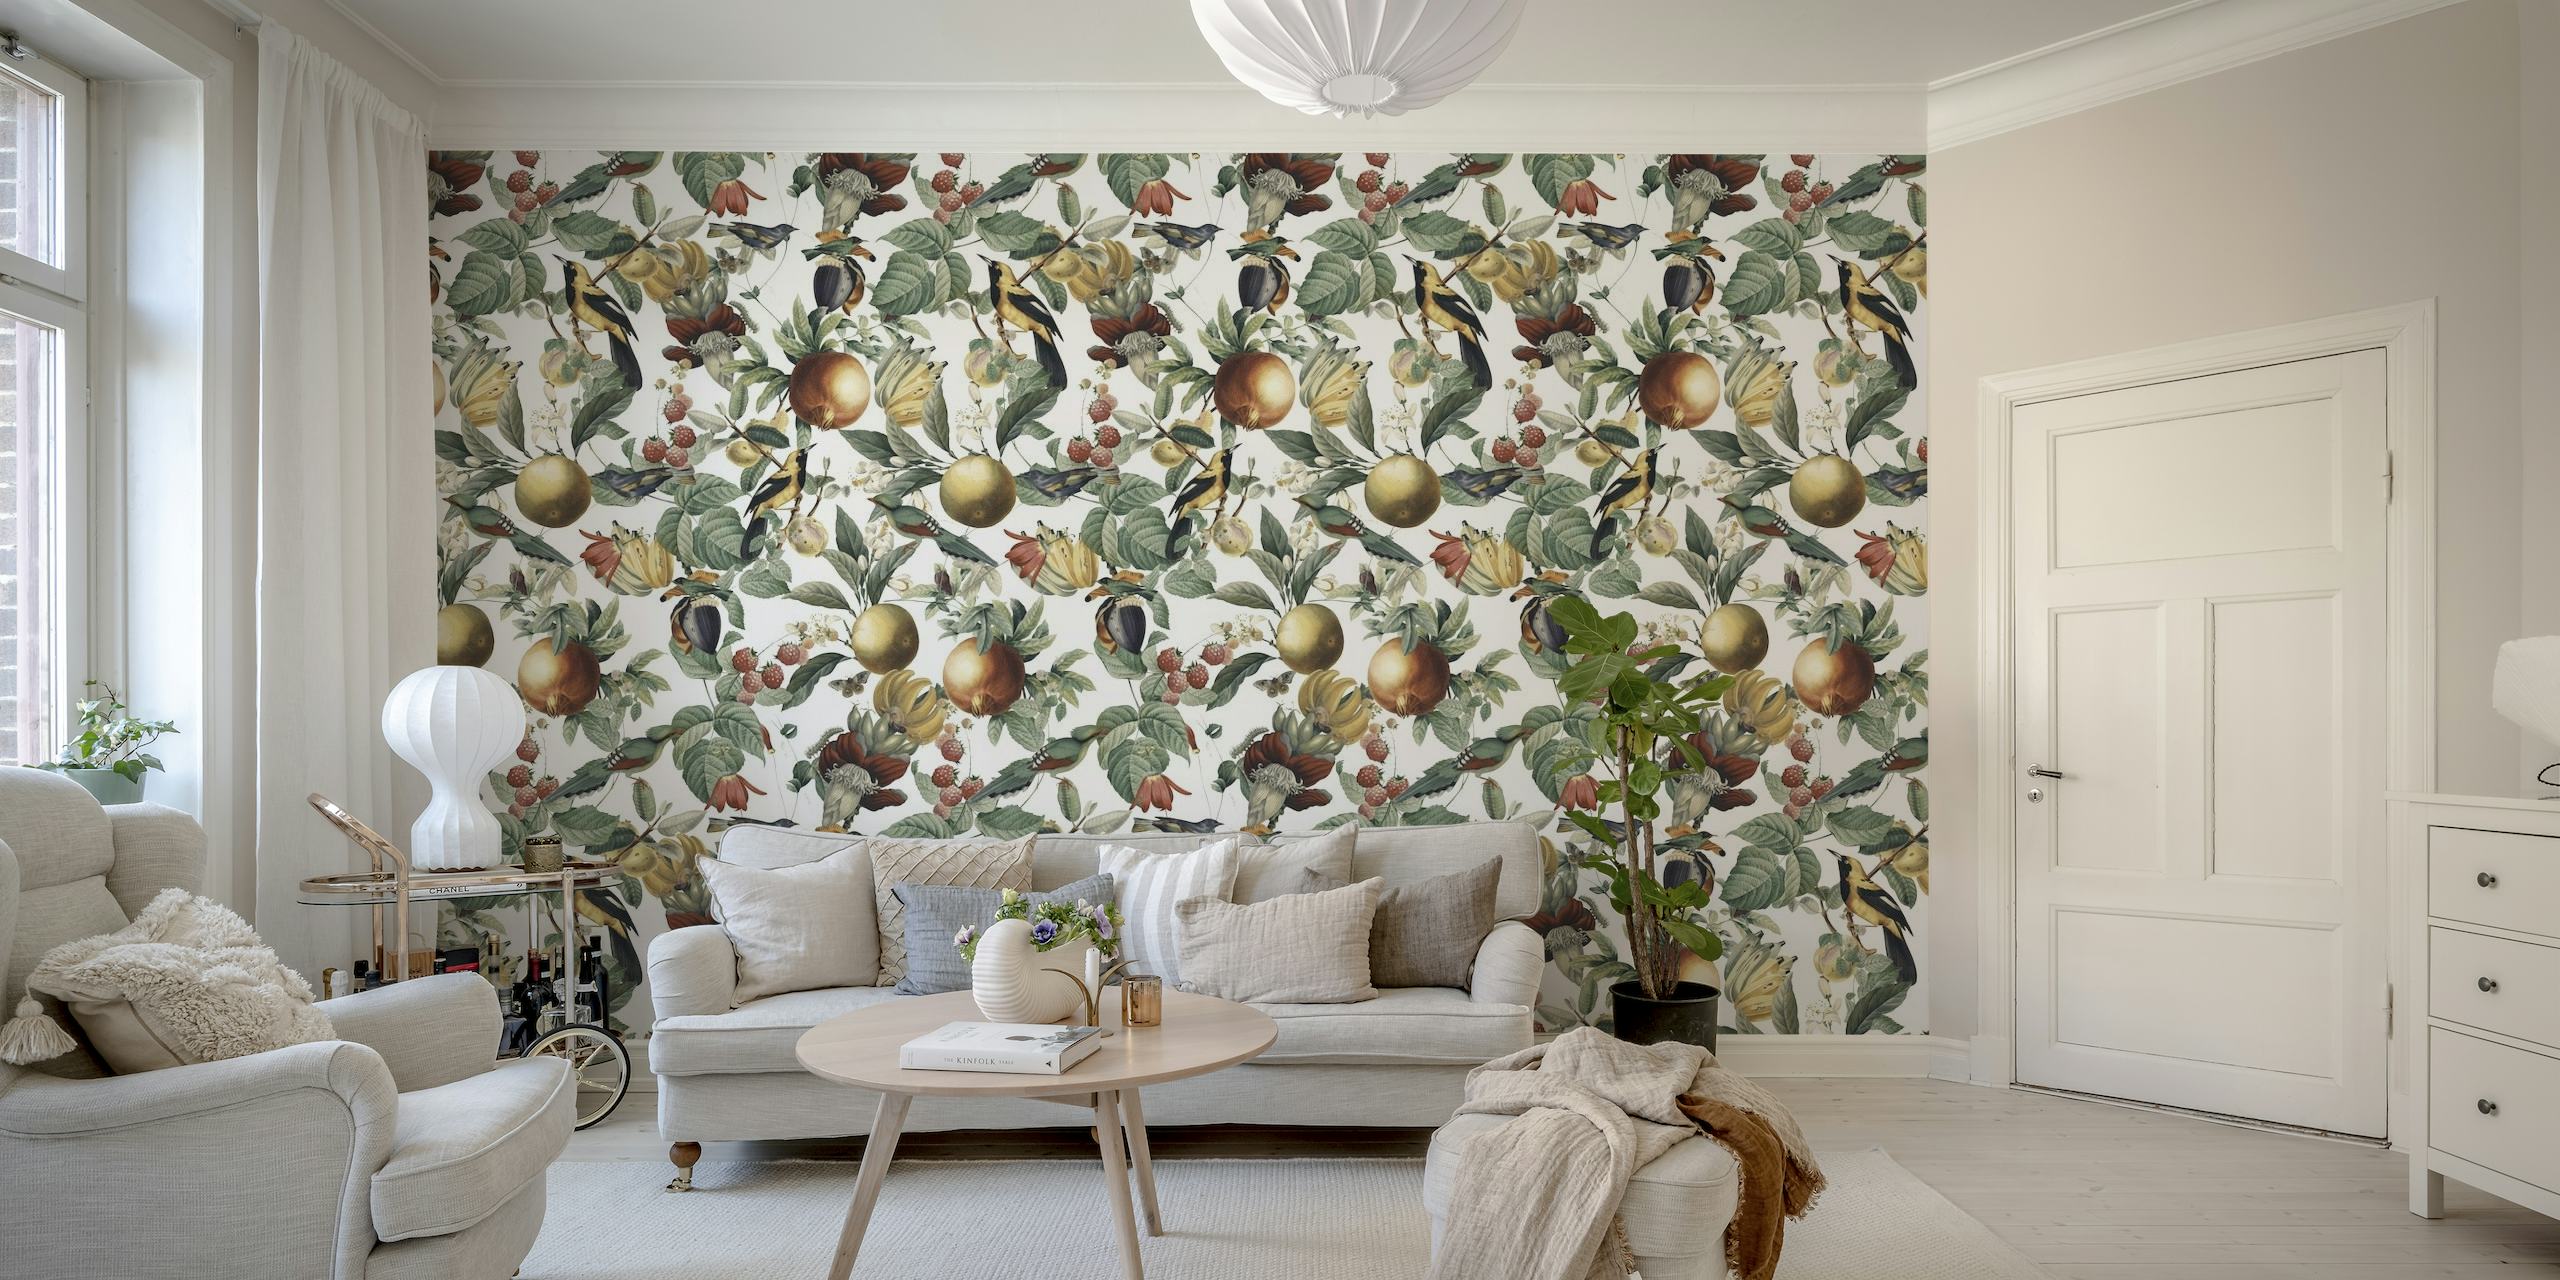 Bountiful birds and fruit trees wall mural